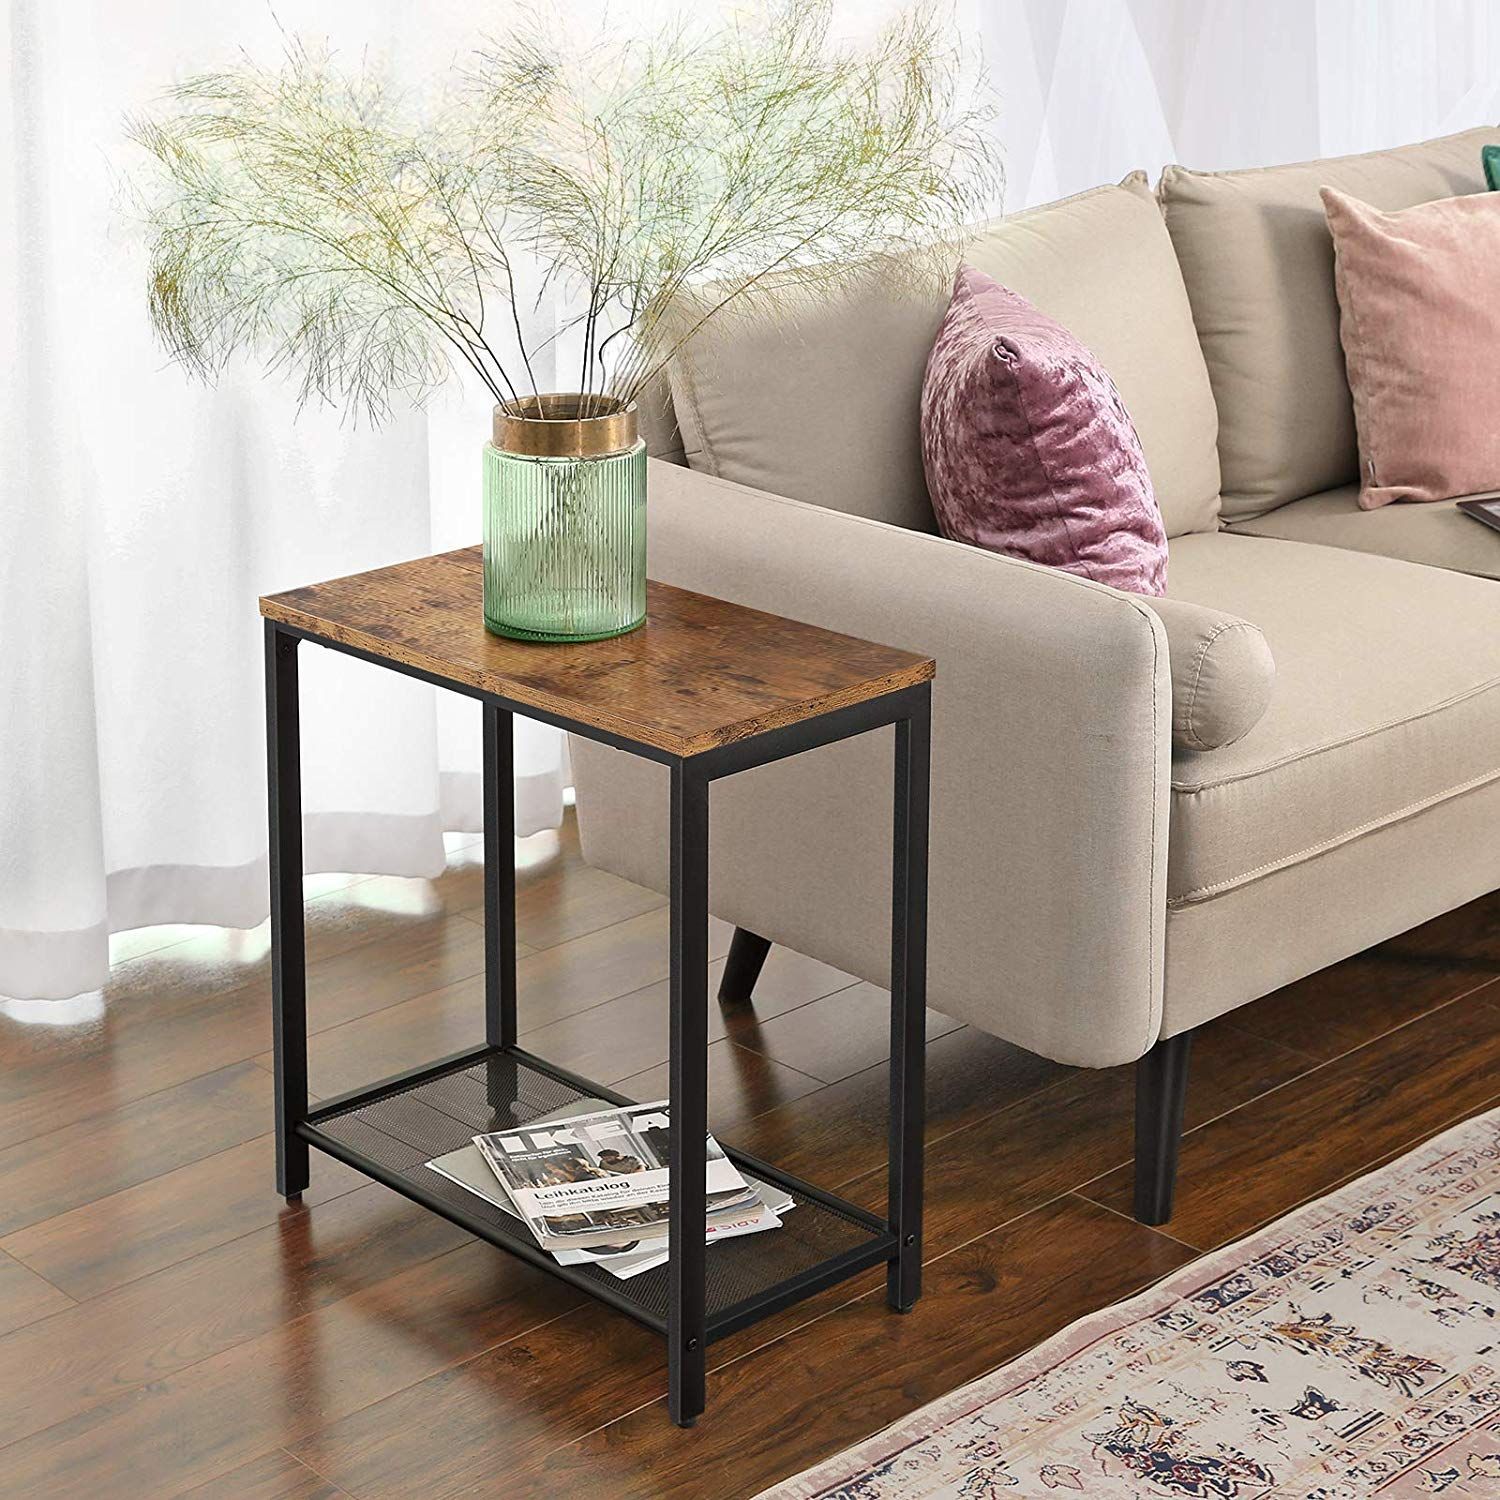 Room And Board Metal Side Tables – Kif Profile Photo Gallery With Metal Side Tables For Living Spaces (View 13 of 20)